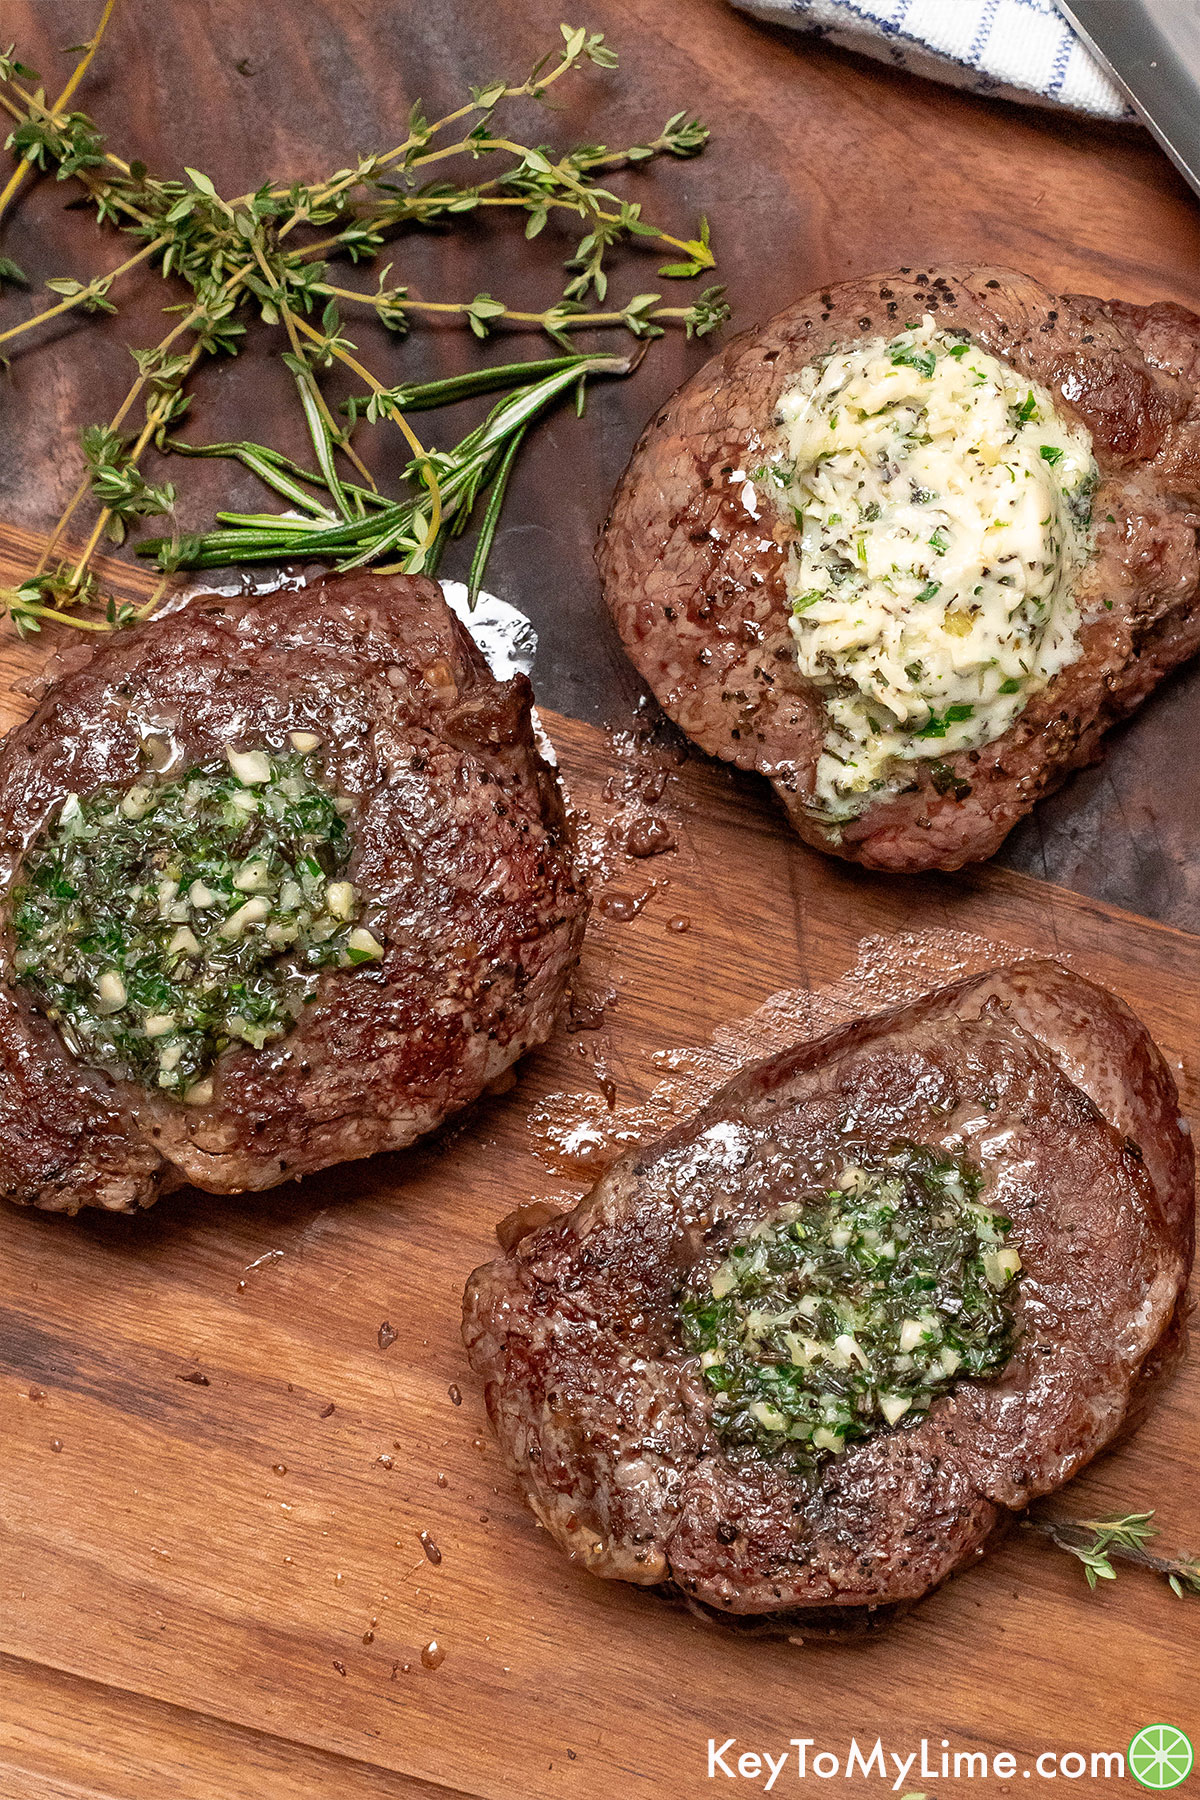 A group of three steaks with melted butter on top next to fresh herbs on a wood cutting board.